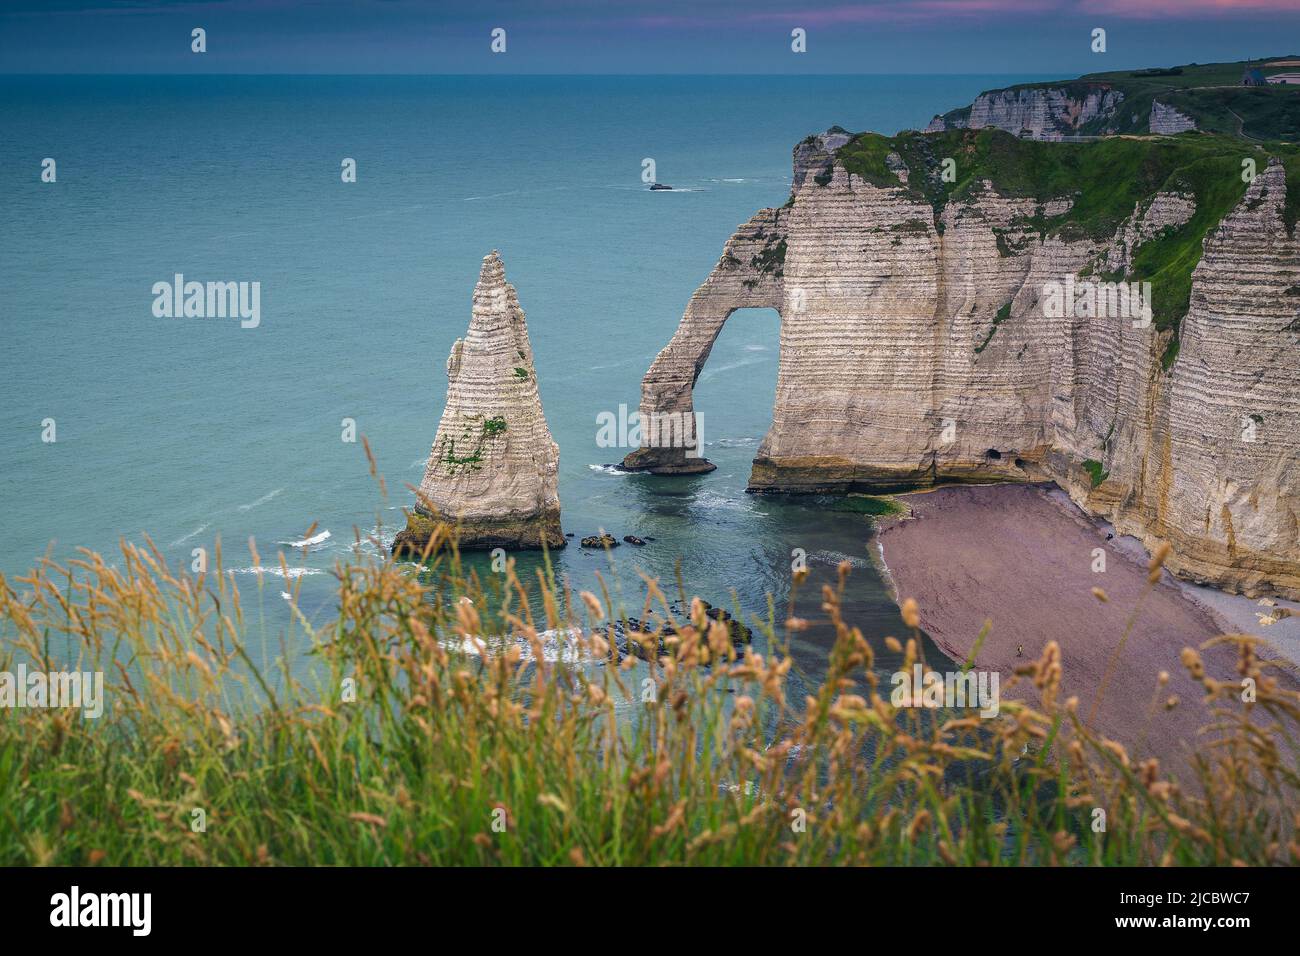 Stunning seaside landscape with majestic high cliffs and green slopes, Etretat, Normandy, France, Europe Stock Photo